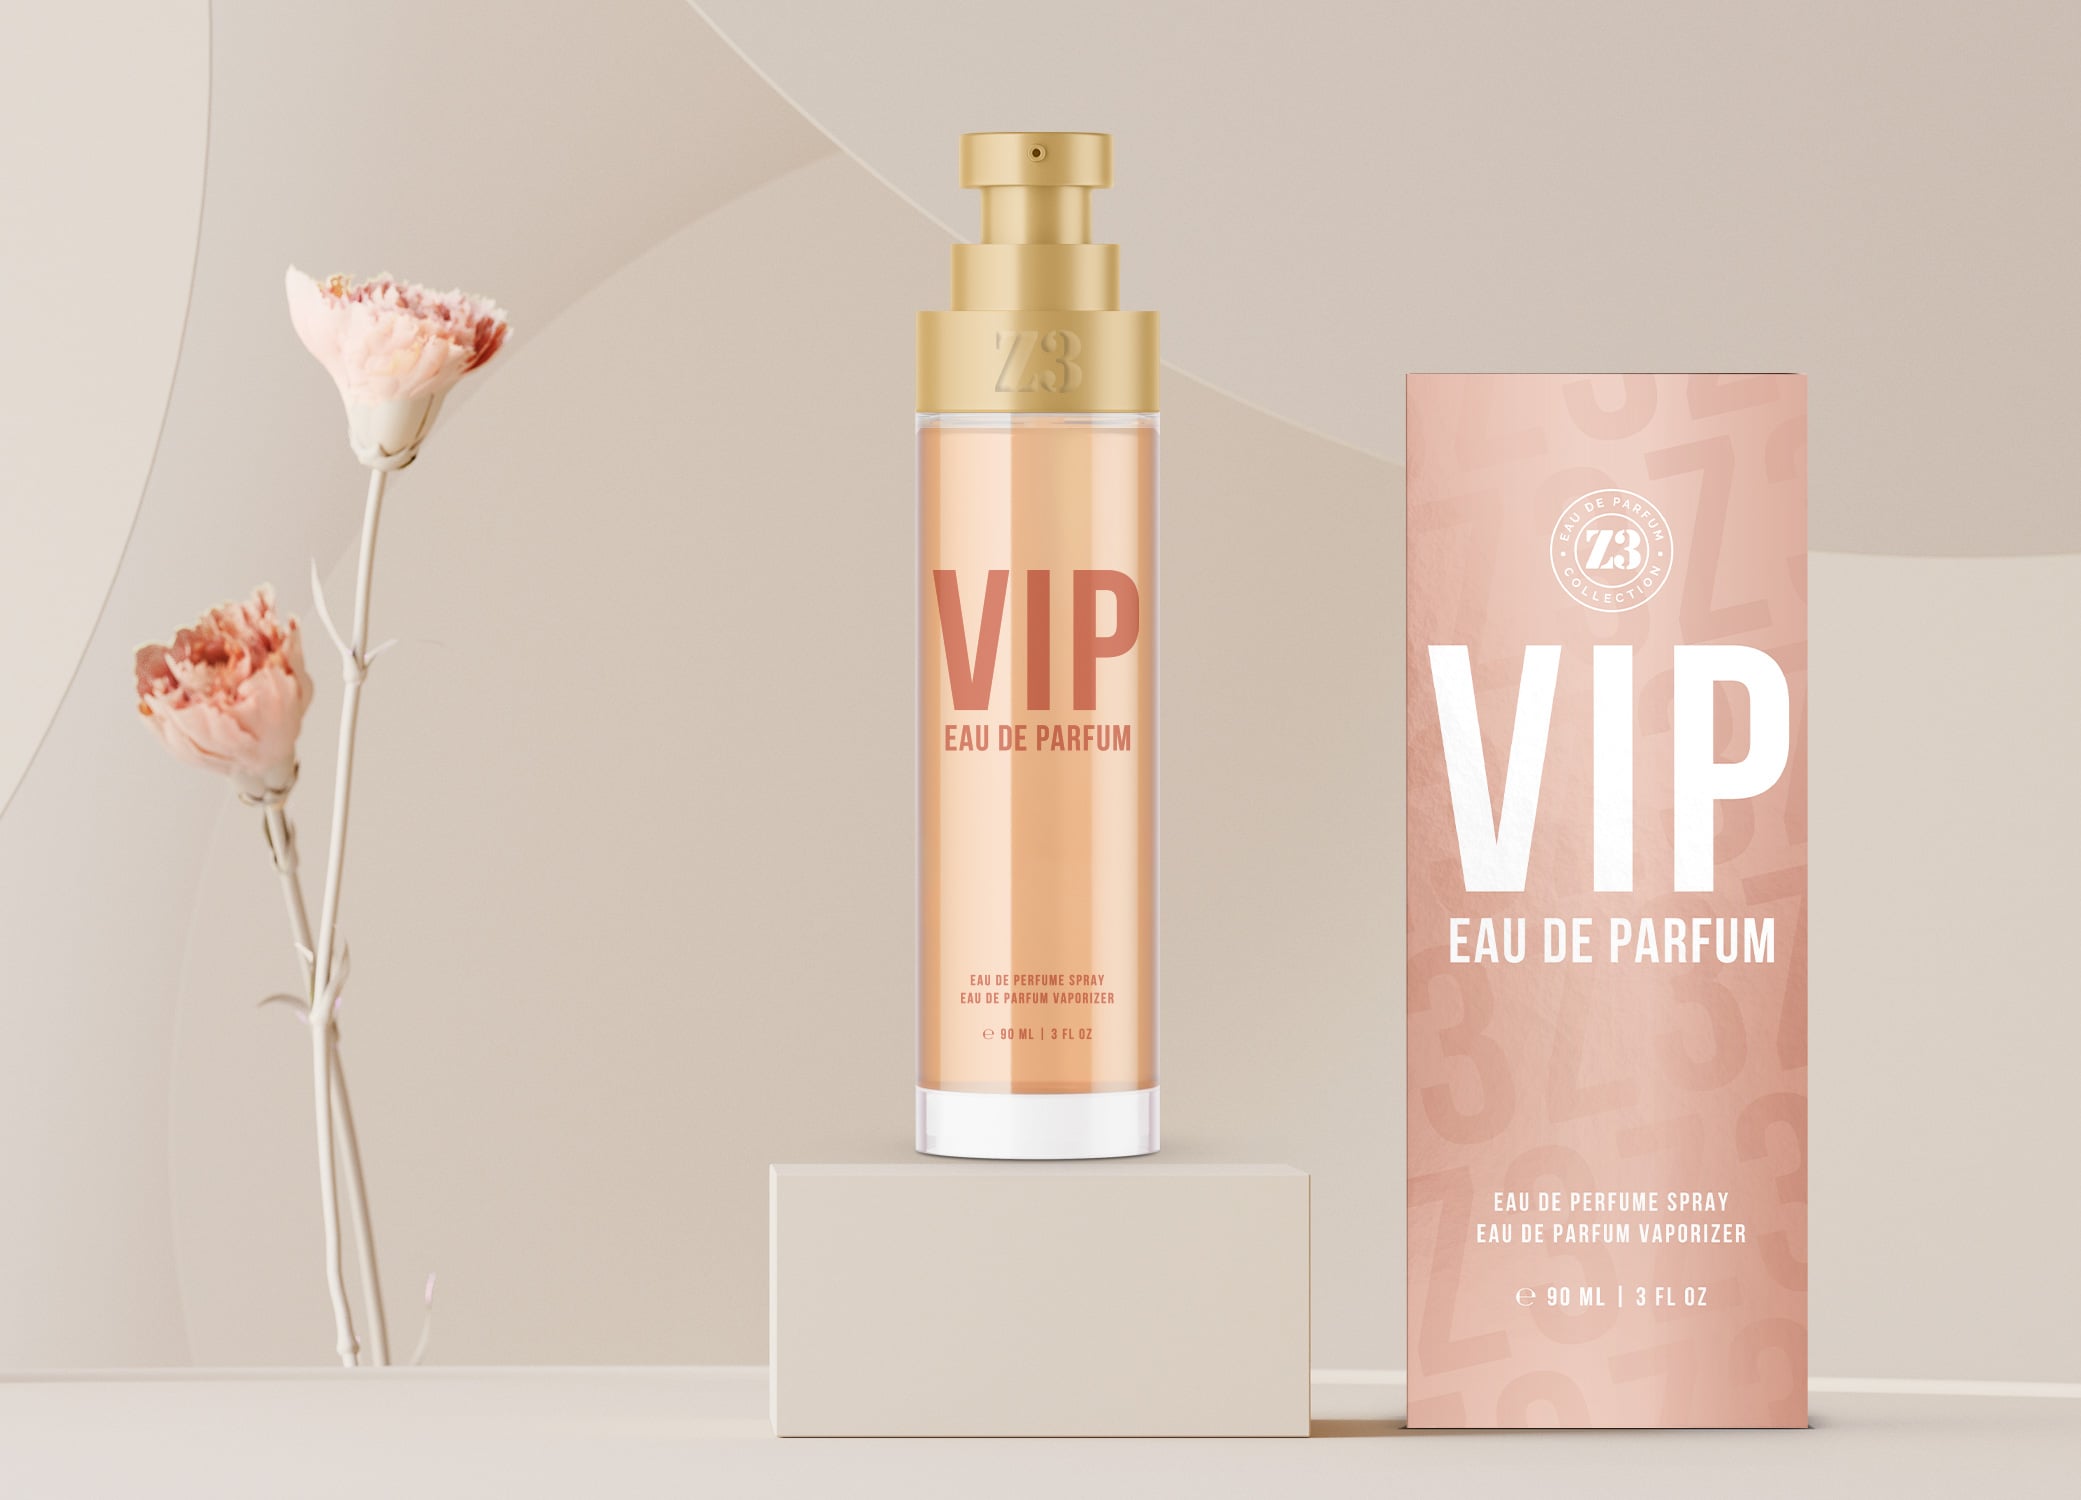 Luxury perfume packaging design for YZY in rose gold with bold silver lettering for Z3 VIP product.